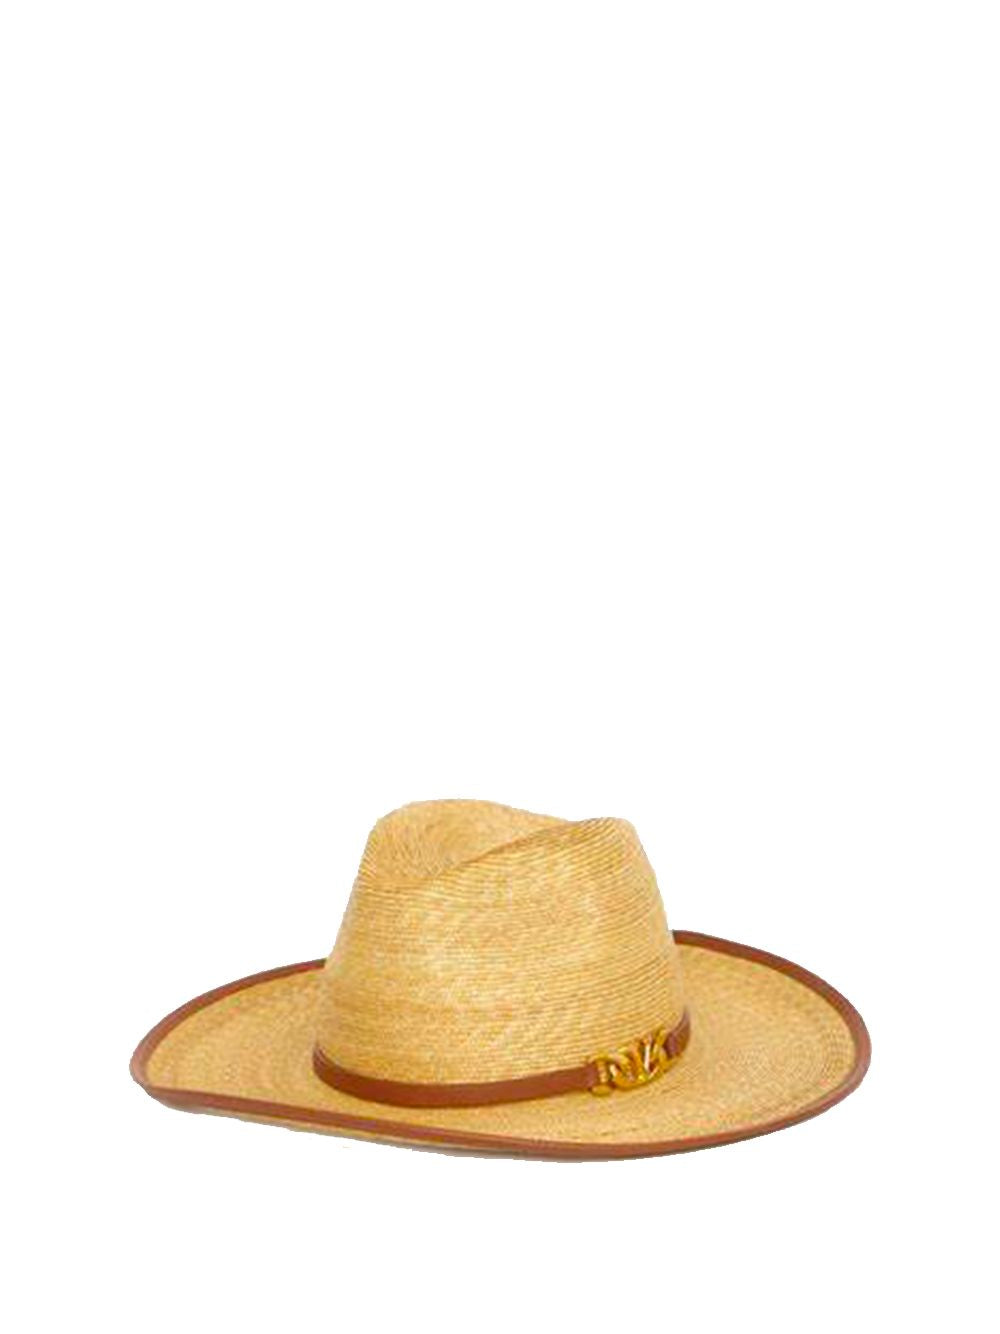 SS23 VLOGO Chain Straw Hat in Nude & Neutrals for Women